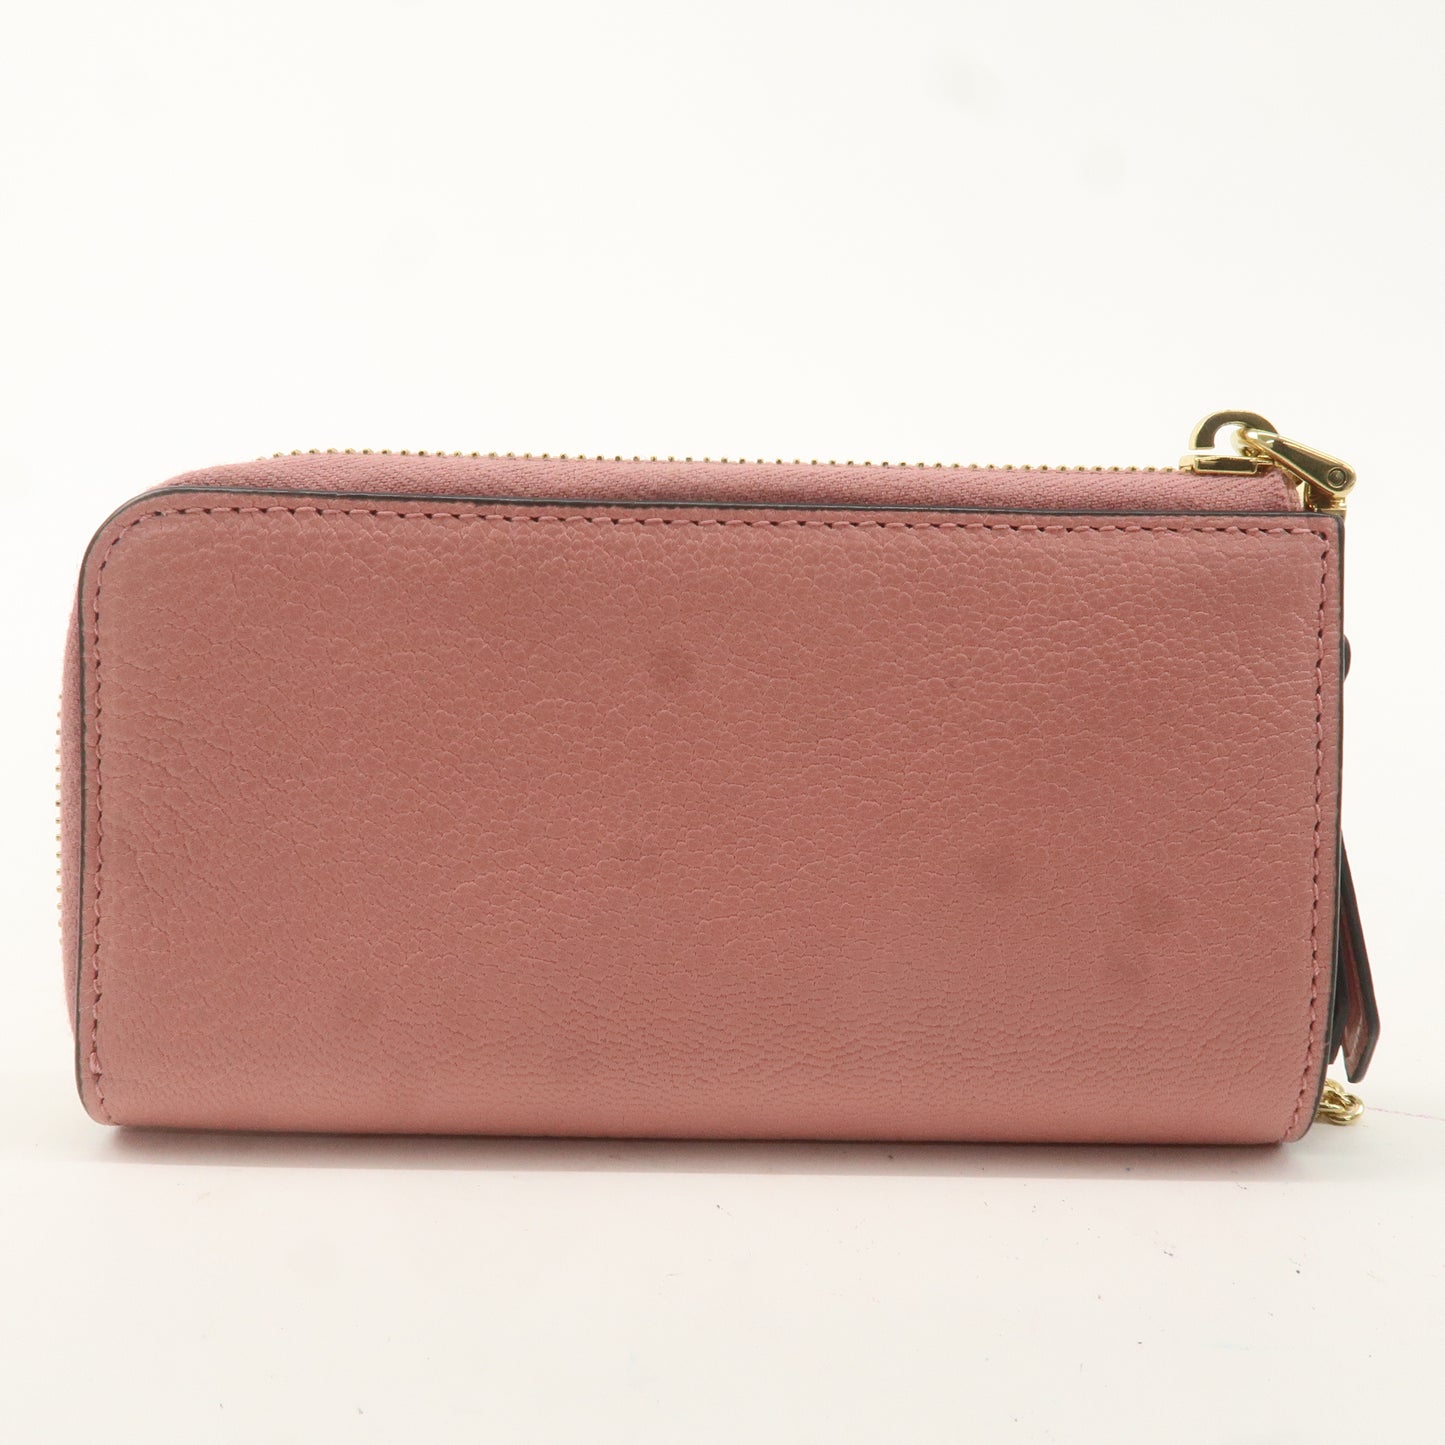 MIU MIU Leather Coin Case Key Pouch Pink 5PP026